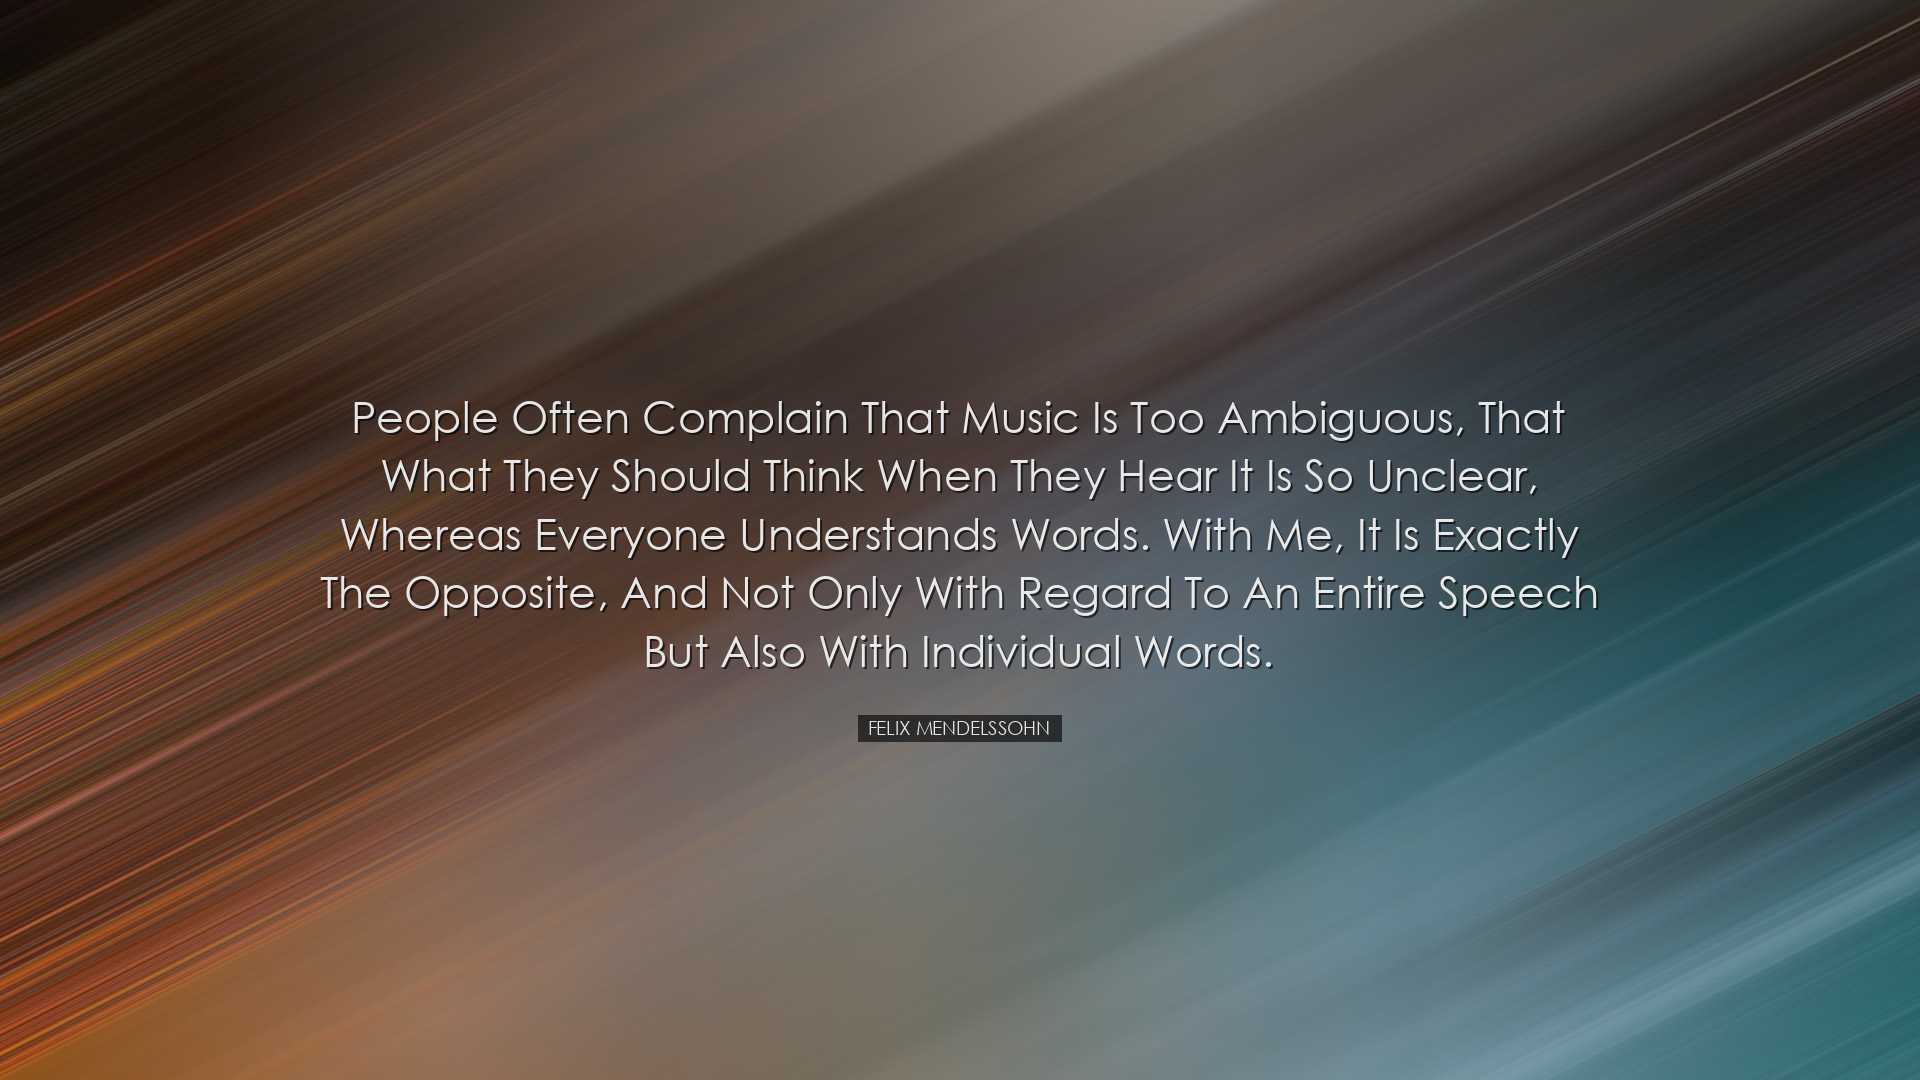 People often complain that music is too ambiguous, that what they